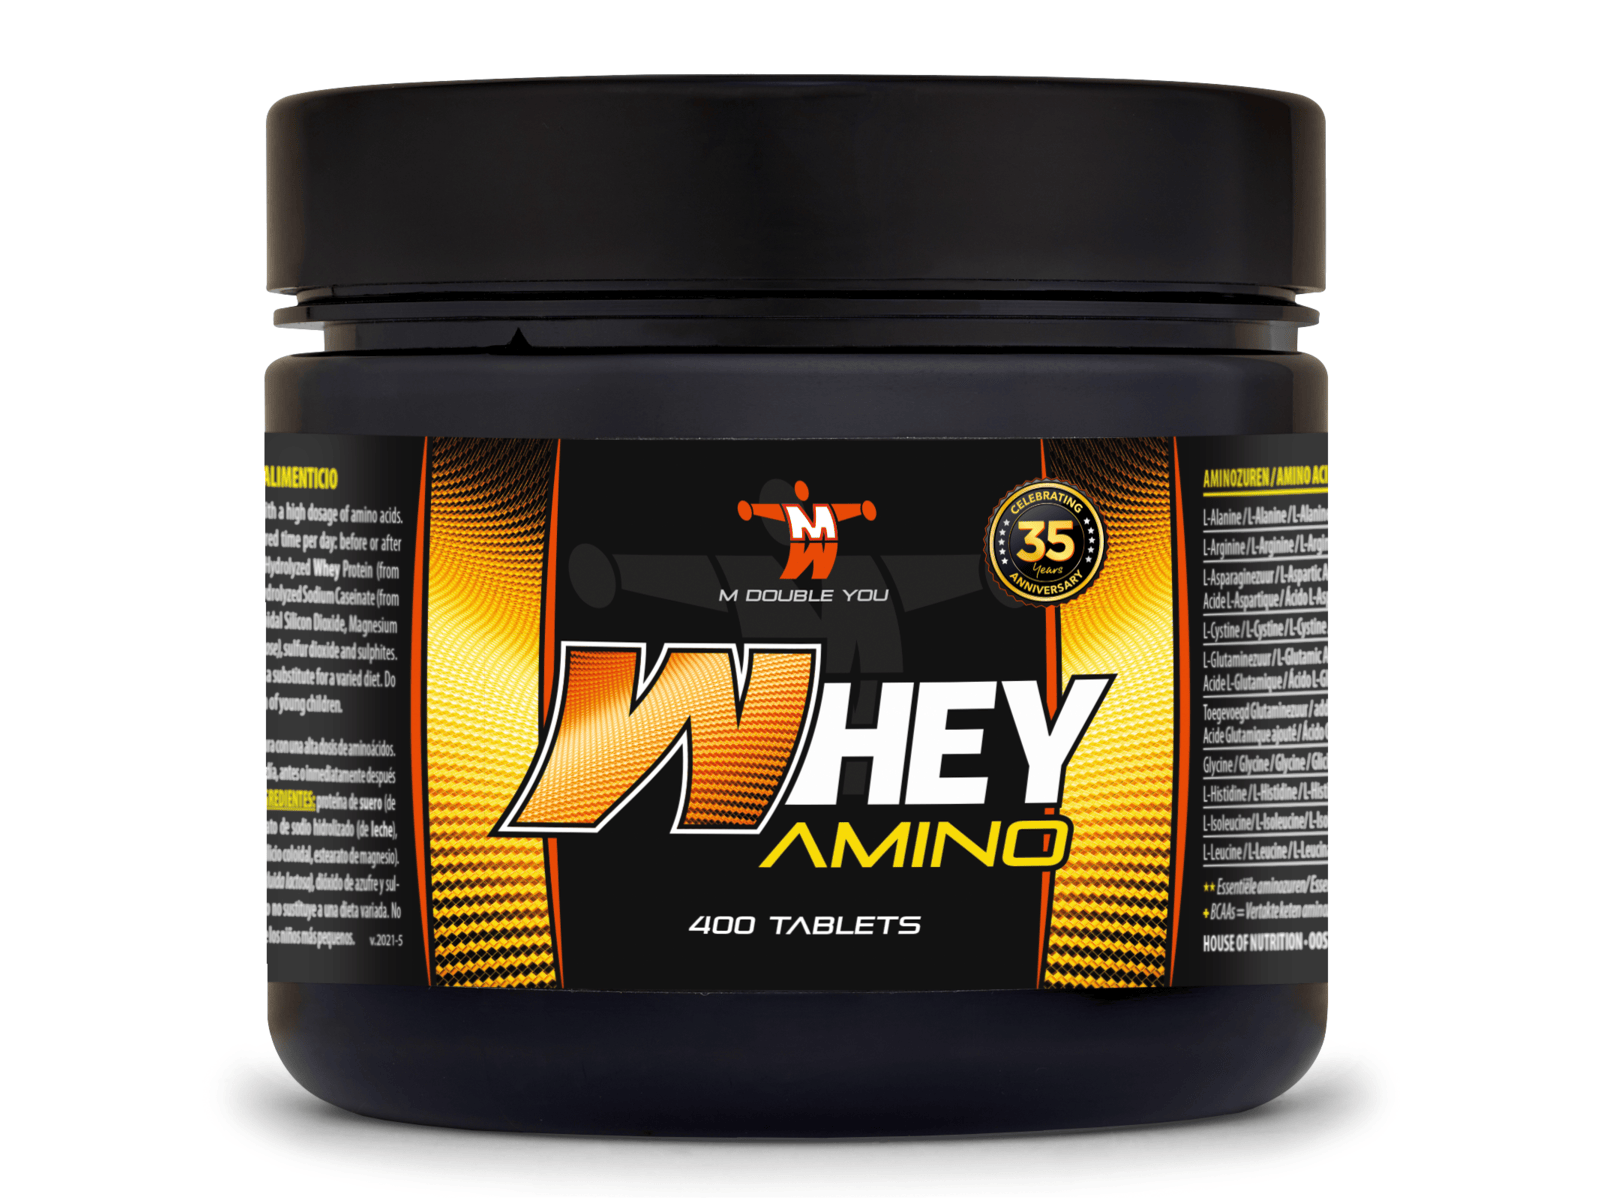 Whey Amino (400 tablets) - M DOUBLE YOU